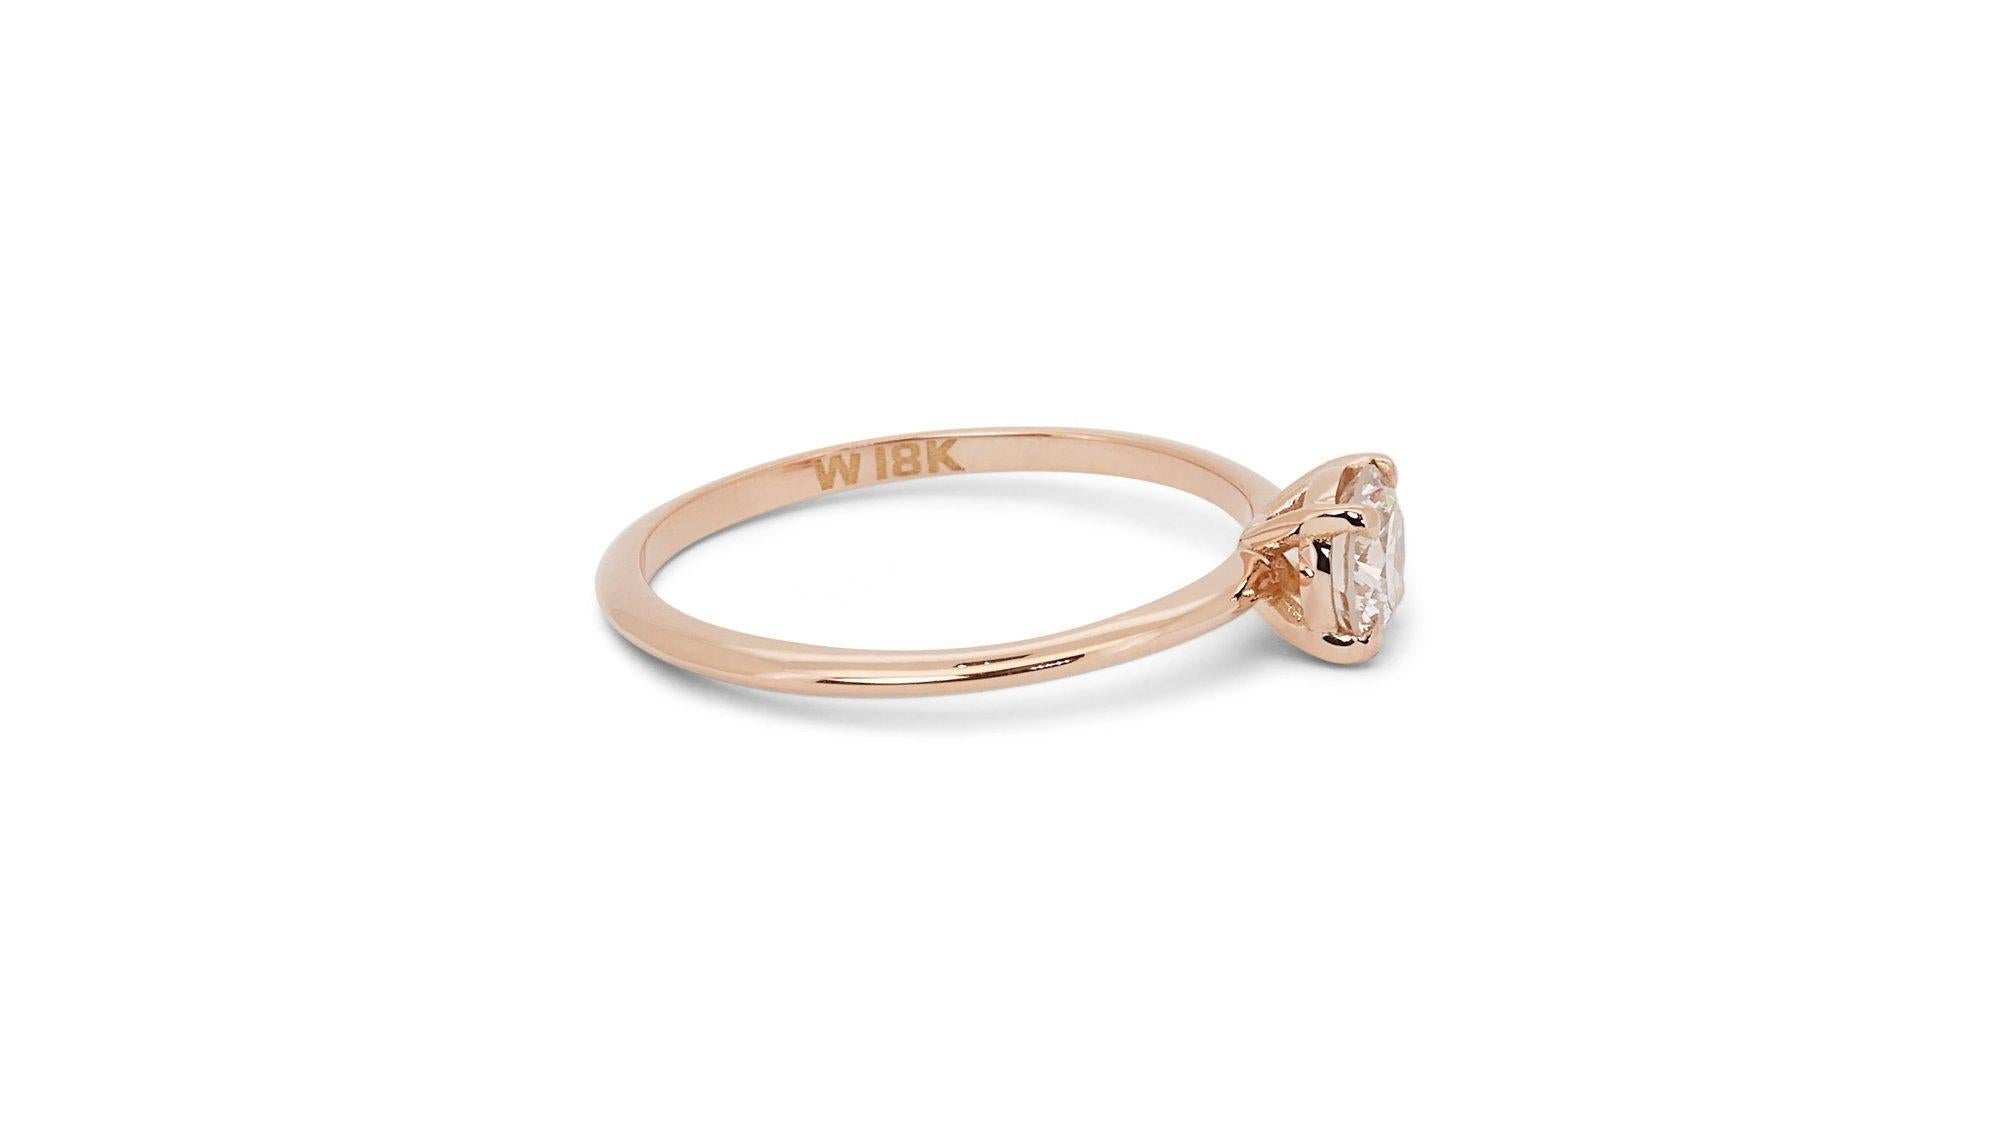 Timeless 0.80ct Diamond Solitaire Ring in 18k Rose Gold - GIA Certified

Embrace the allure of this exquisite 18k rose gold solitaire ring, highlighted by a captivating 0.80-carat round diamond. Certified by GIA, it reflects a commitment to quality